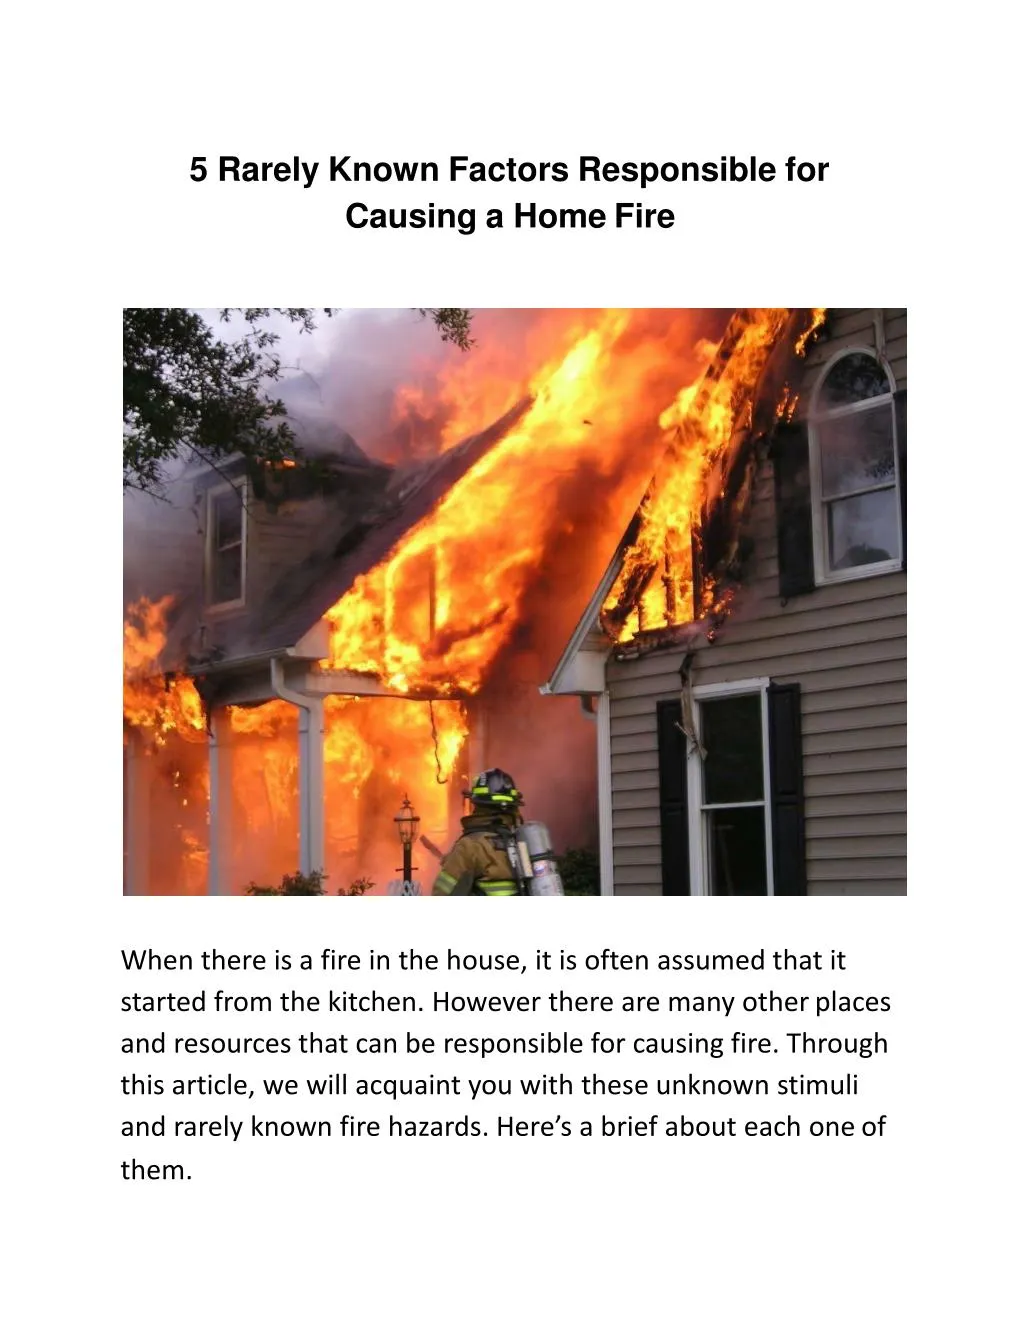 5 rarely known factors responsible for causing